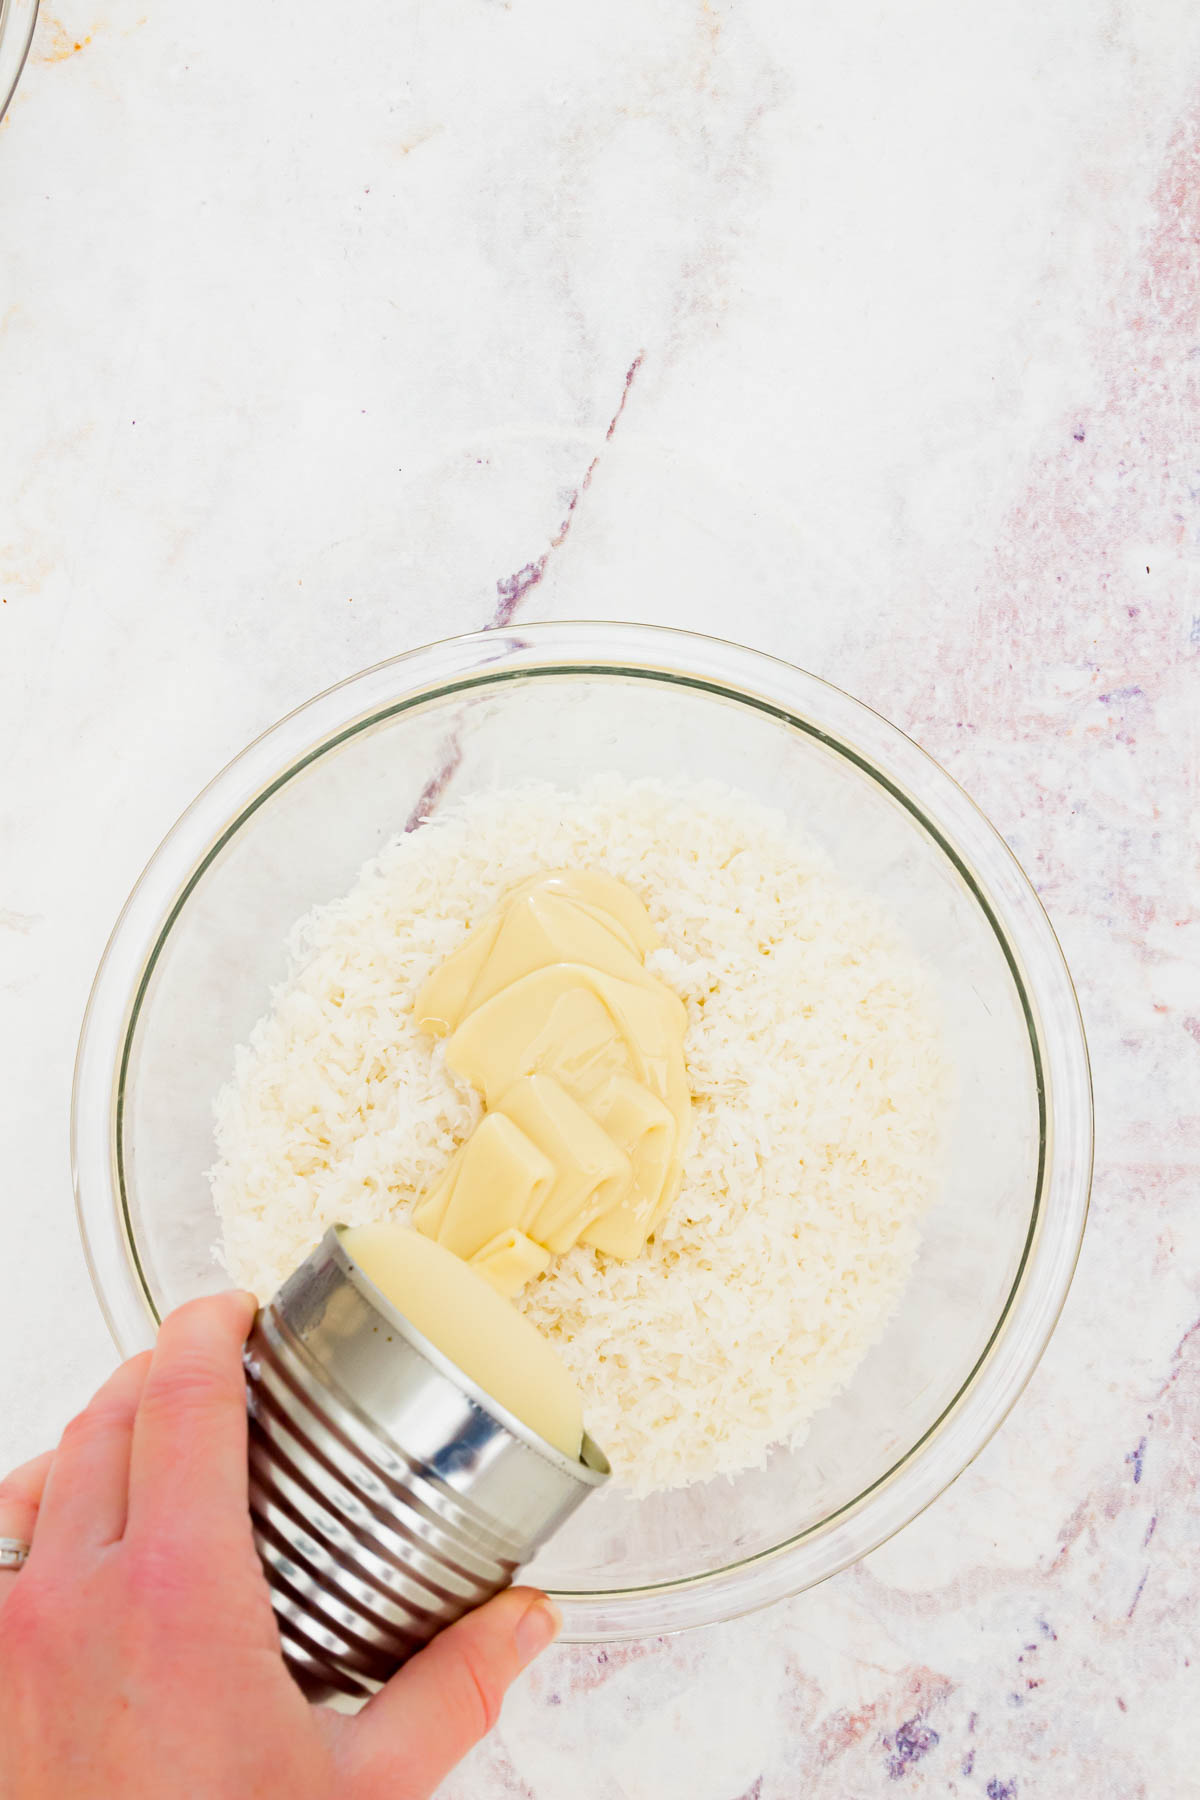 A can of sweetened condensed milk being poured over shredded coconut in a glass bowl.